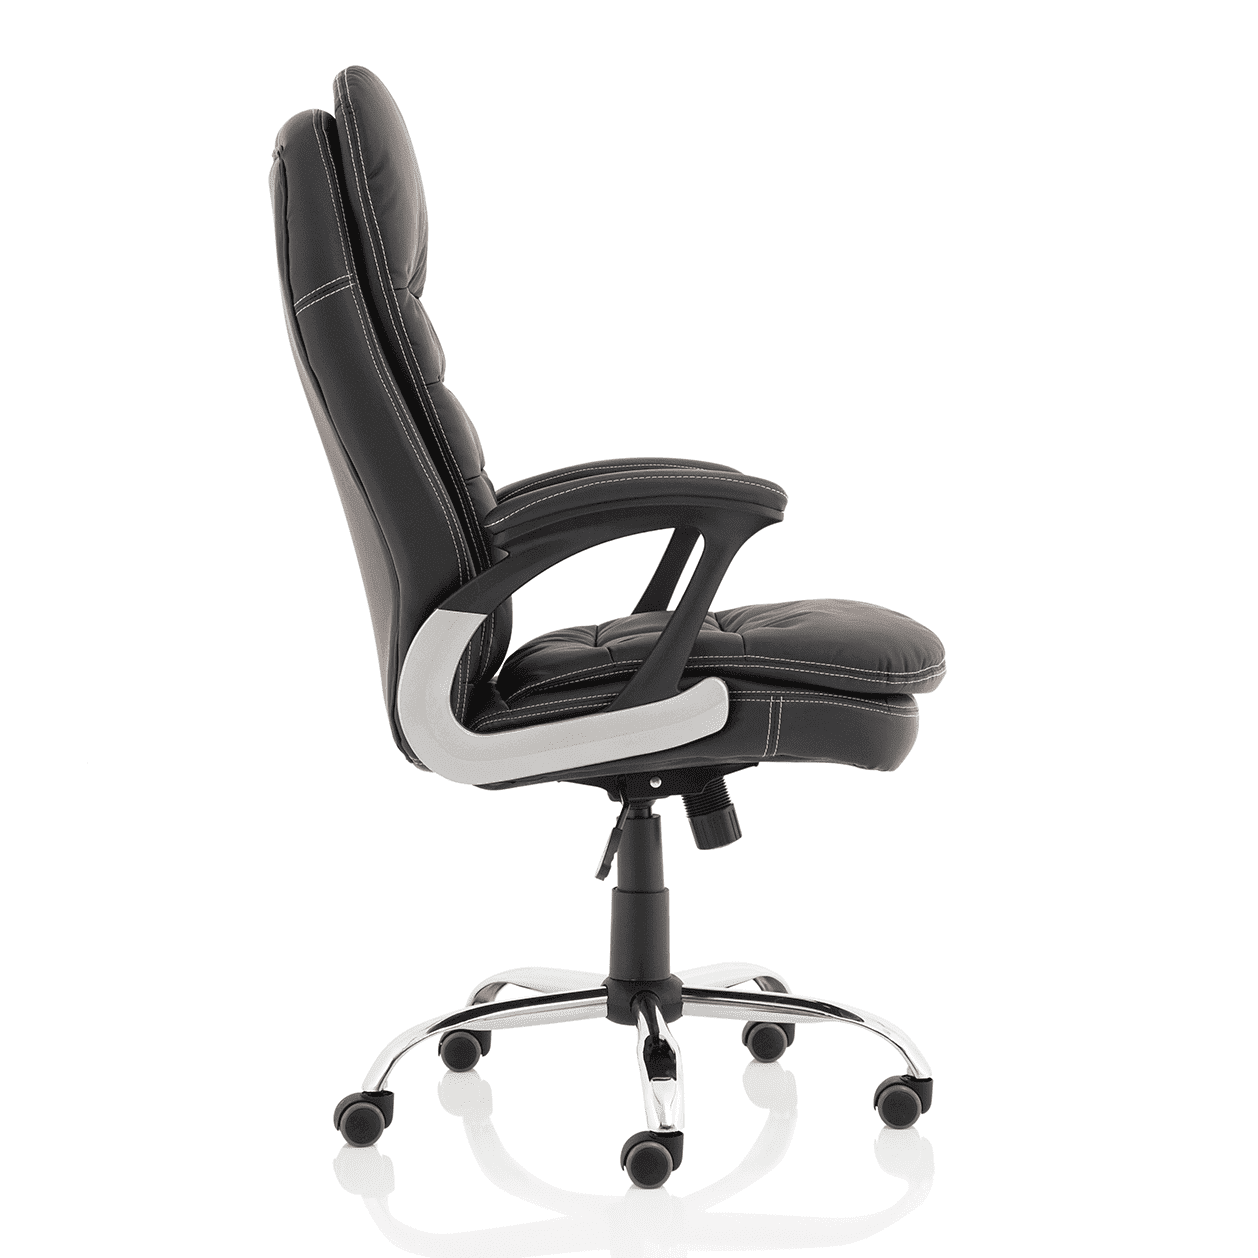 Ontario High Back Executive Office Chair with Arms - Chrome Metal Frame, Polyurethane Seat & Back, 120kg Capacity, 8hr Usage, 1yr Guarantee